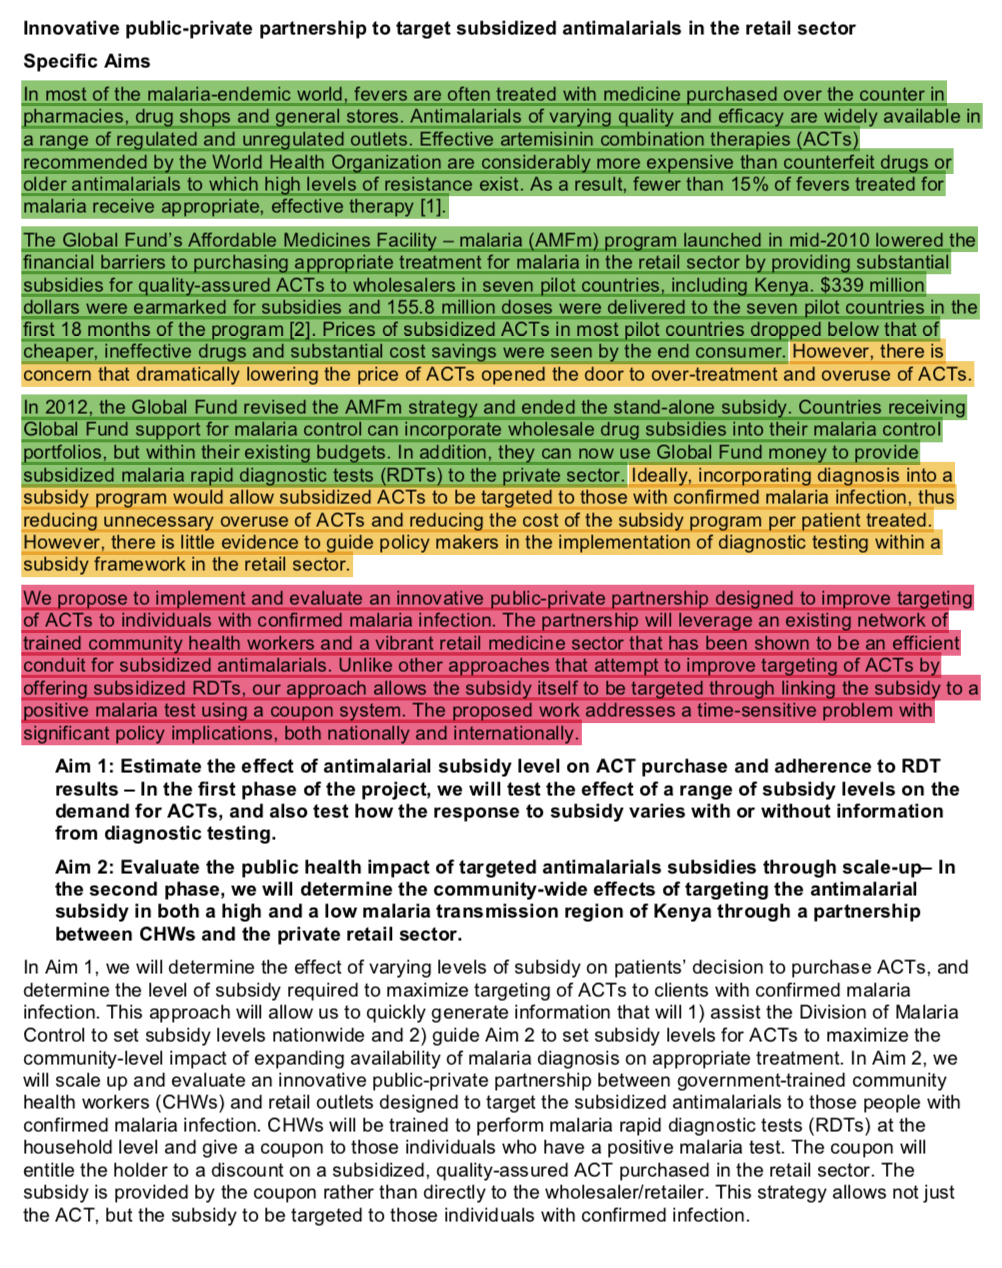 Specific aims page from the O'Meara lab. For a full resolution version, visit [https://tinyurl.com/y2k6jsa4](https://tinyurl.com/y2k6jsa4).